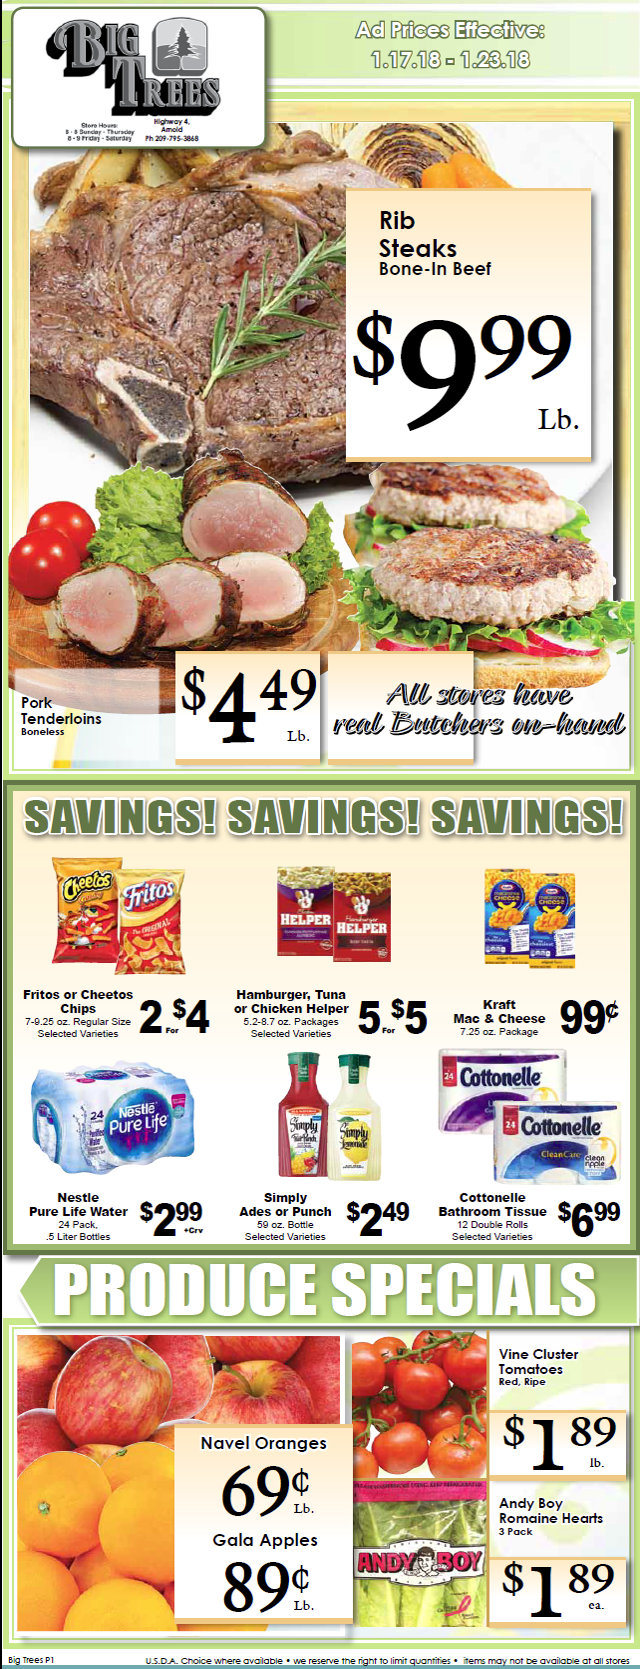 Big Trees Market Weekly Ad & Specials Through January 23rd